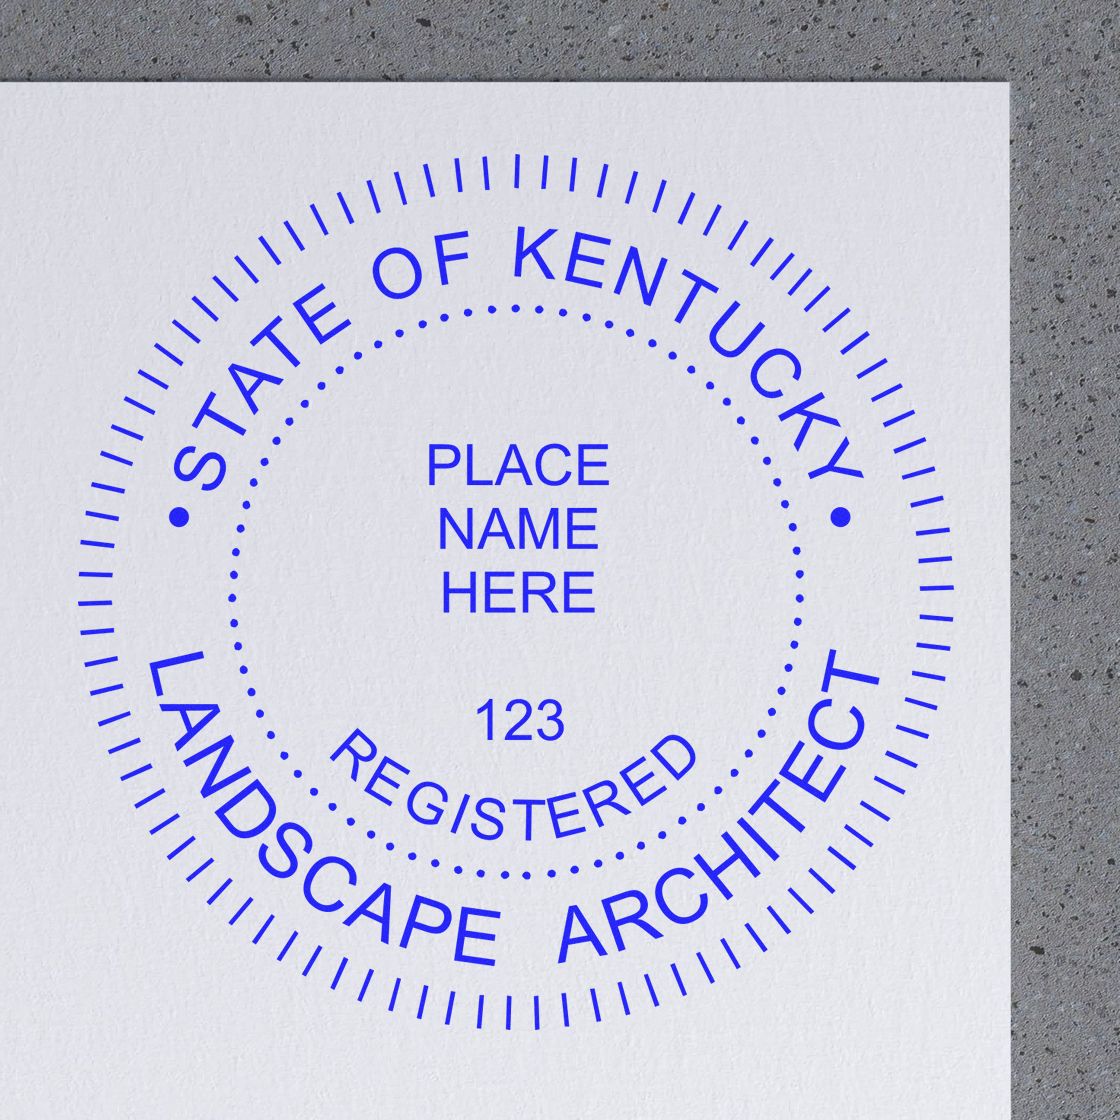 Another Example of a stamped impression of the Slim Pre-Inked Kentucky Landscape Architect Seal Stamp on a piece of office paper.